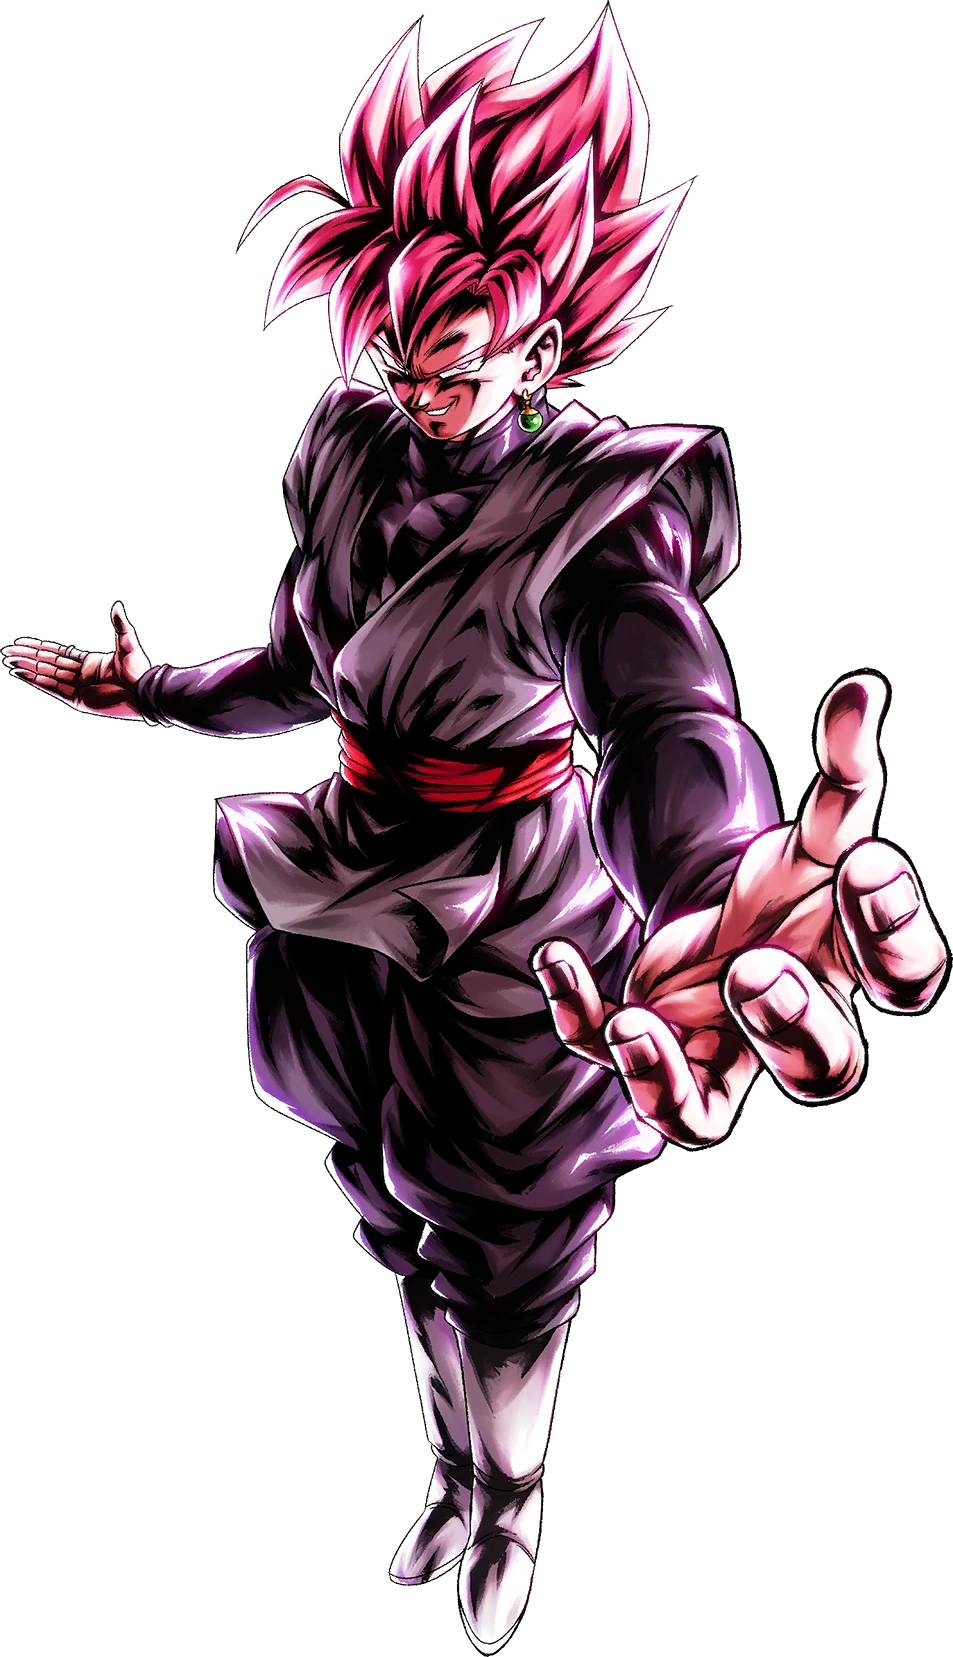 What's your single favorite move in this game? Mine is Goku Black's Zamasu  grab : r/dragonballfighterz